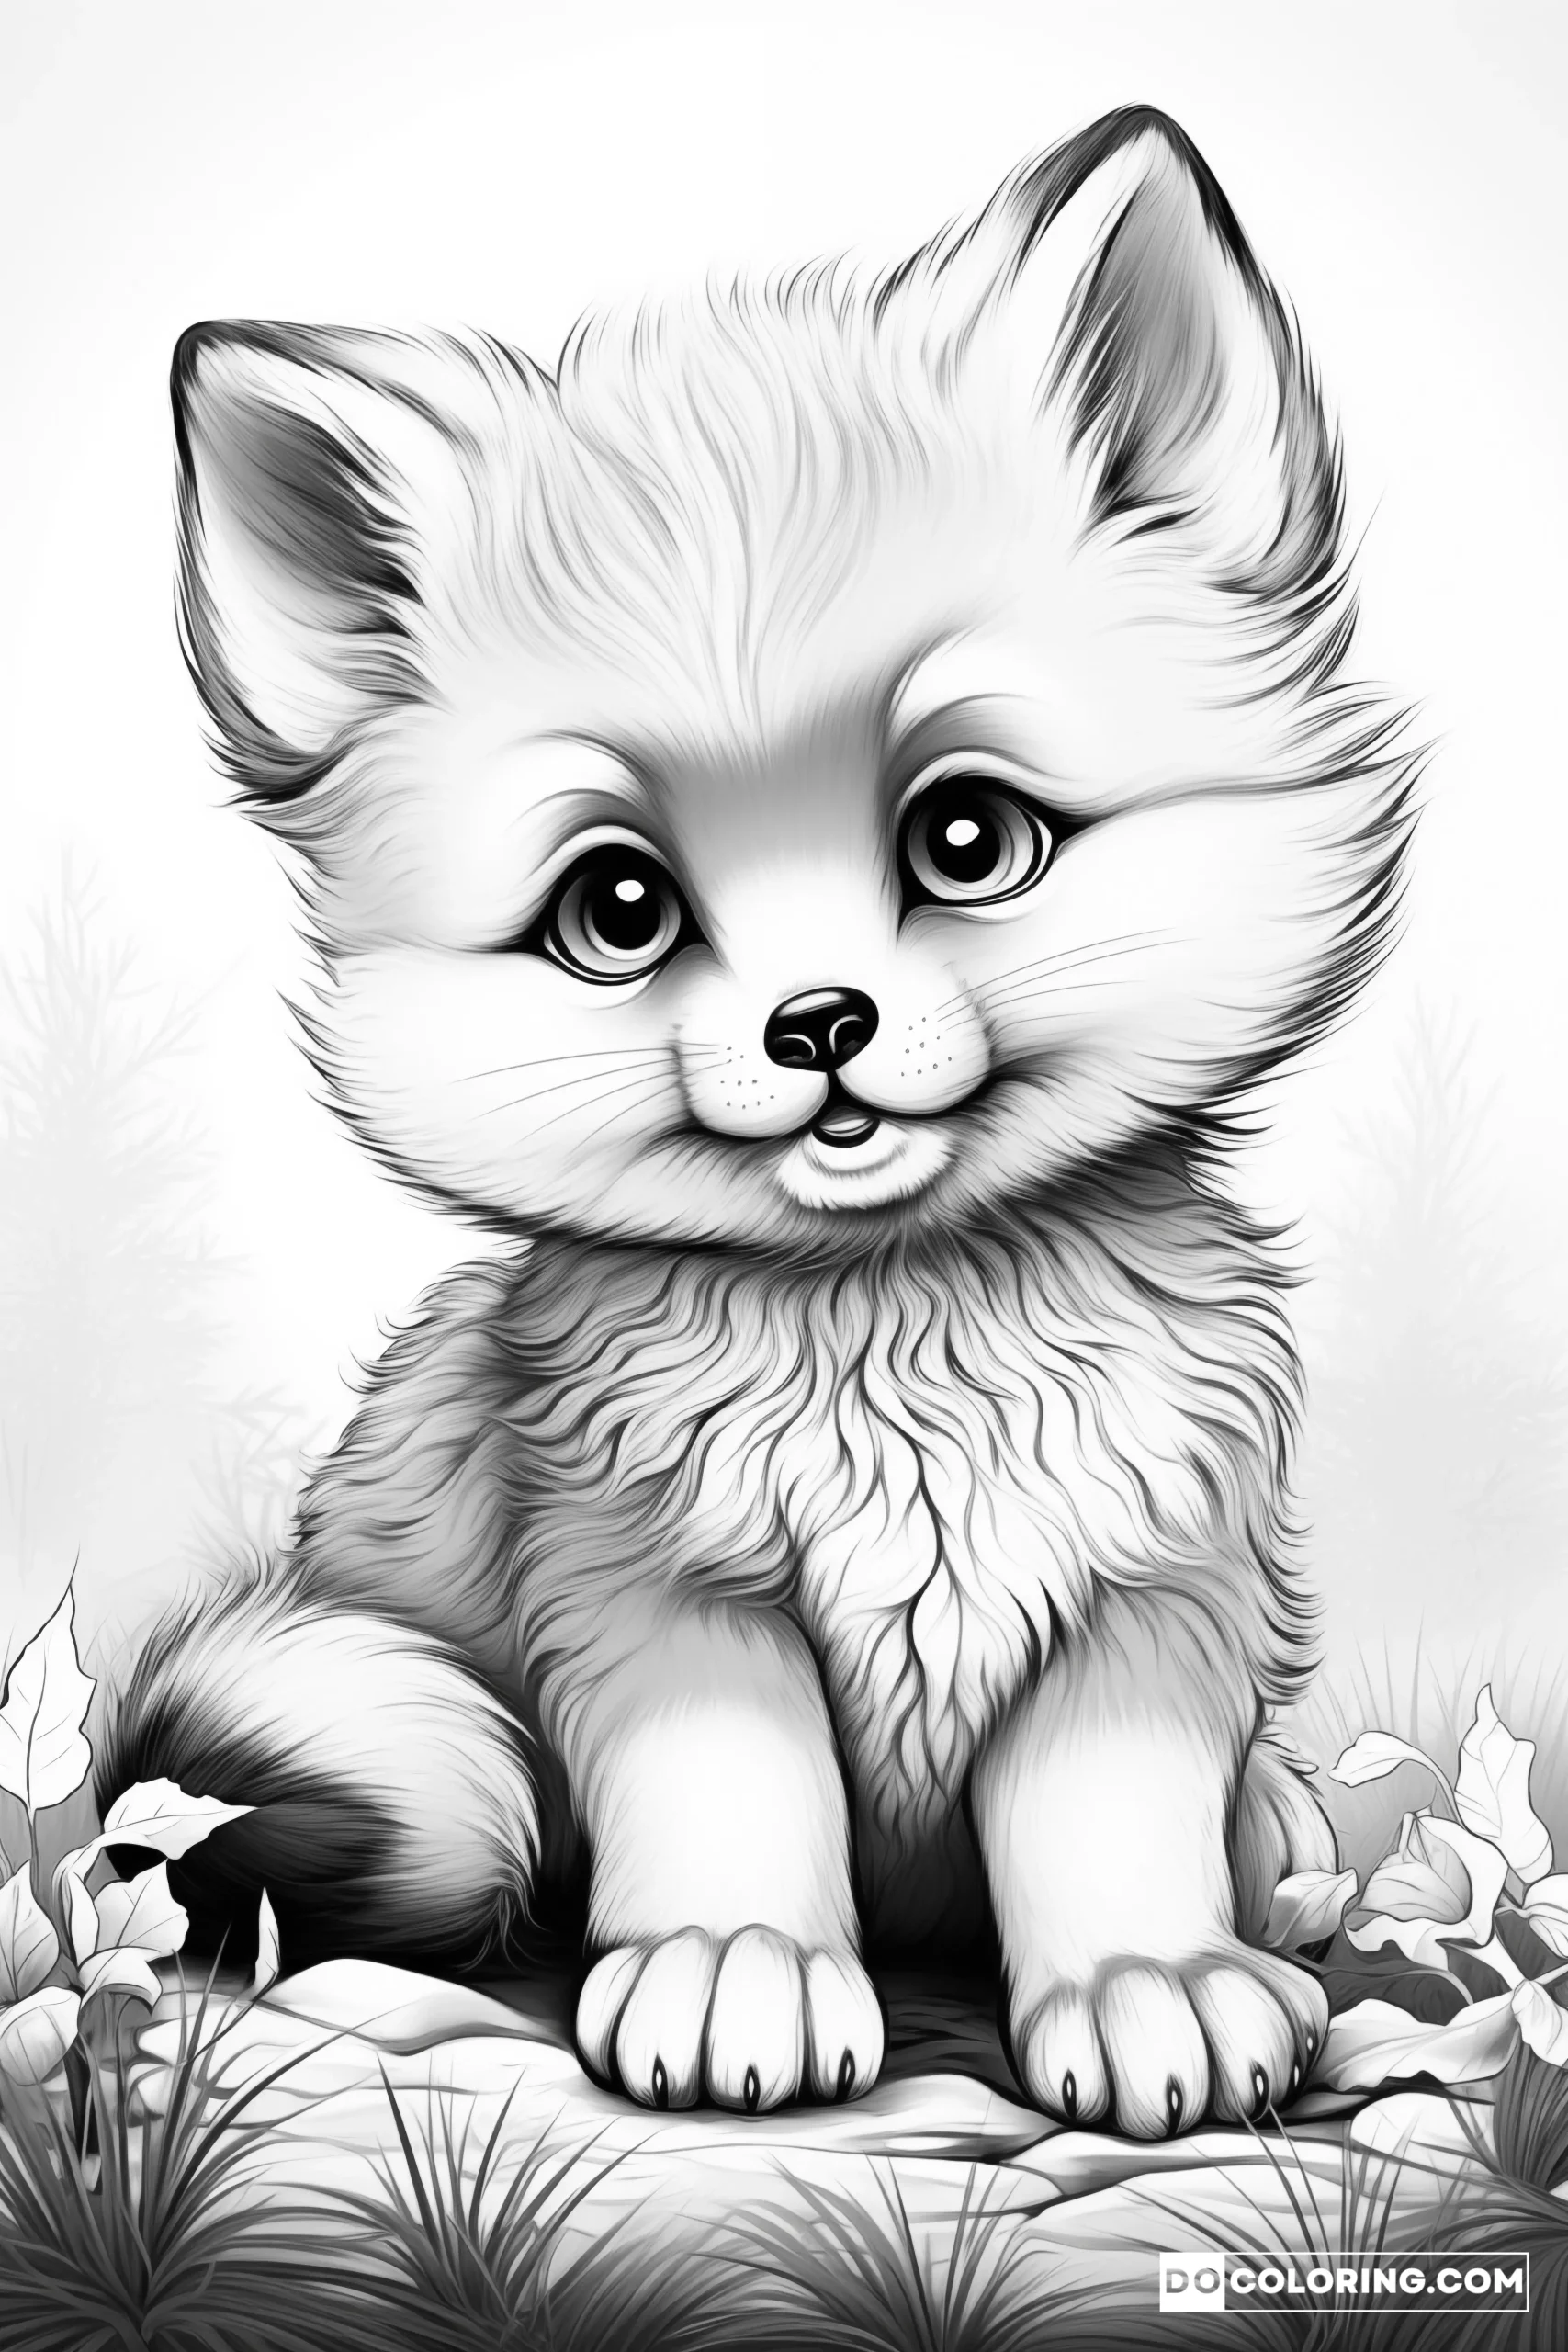 A meticulously designed coloring page showcasing a cute baby fox in a realistic style.